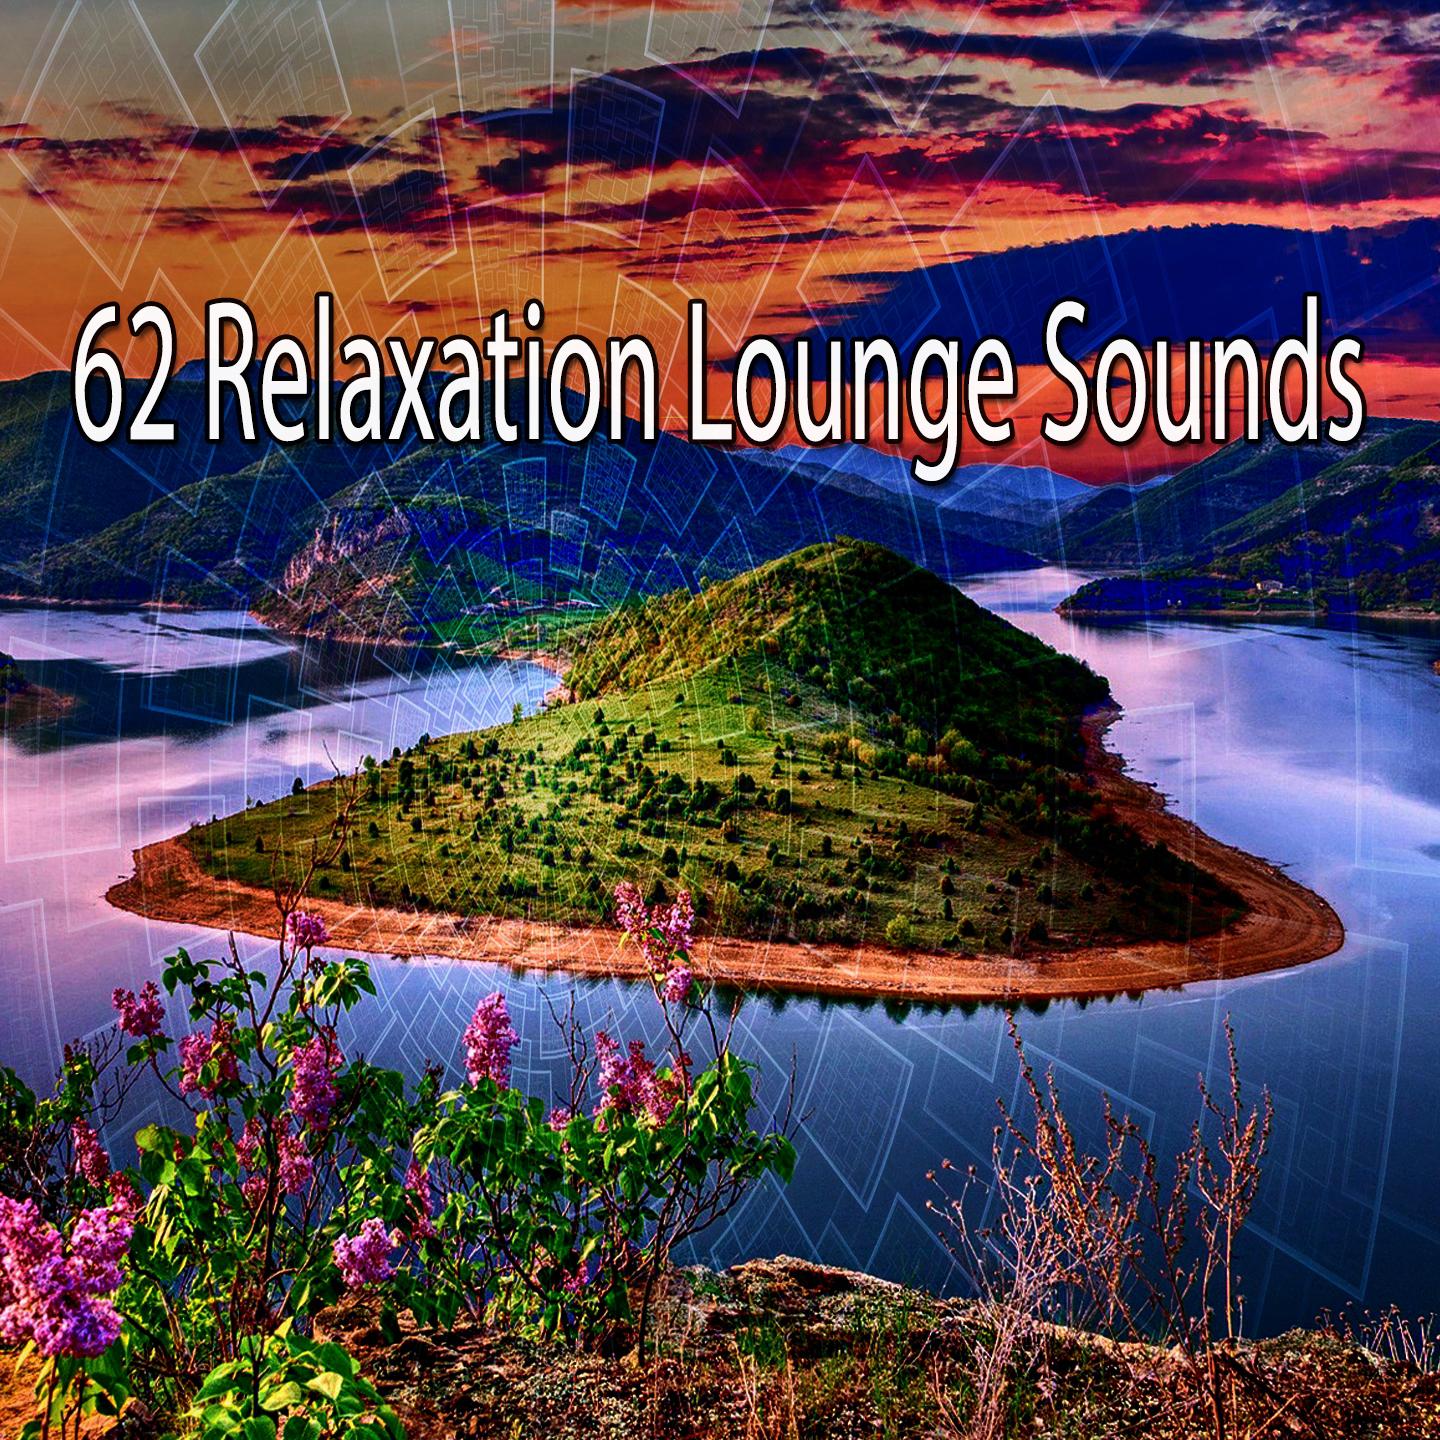 62 Relaxation Lounge Sounds